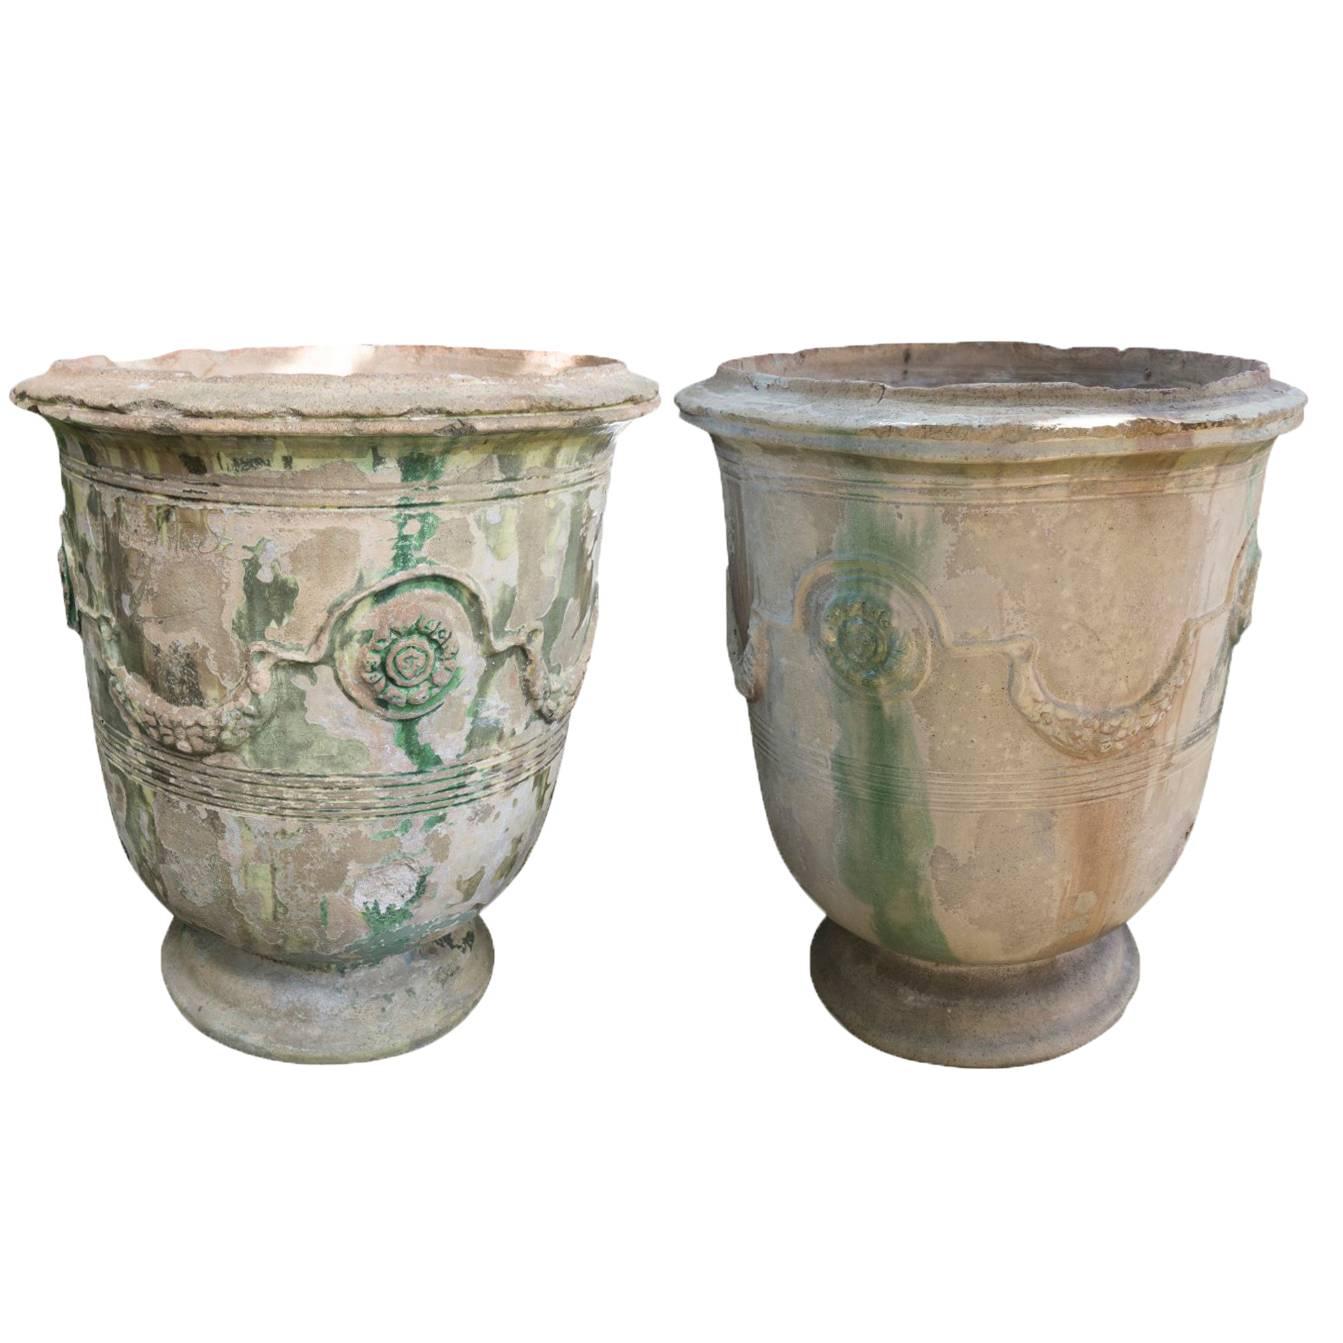 Rare Pair of 19th Century French Grand Anduze Jars in Green and Brown